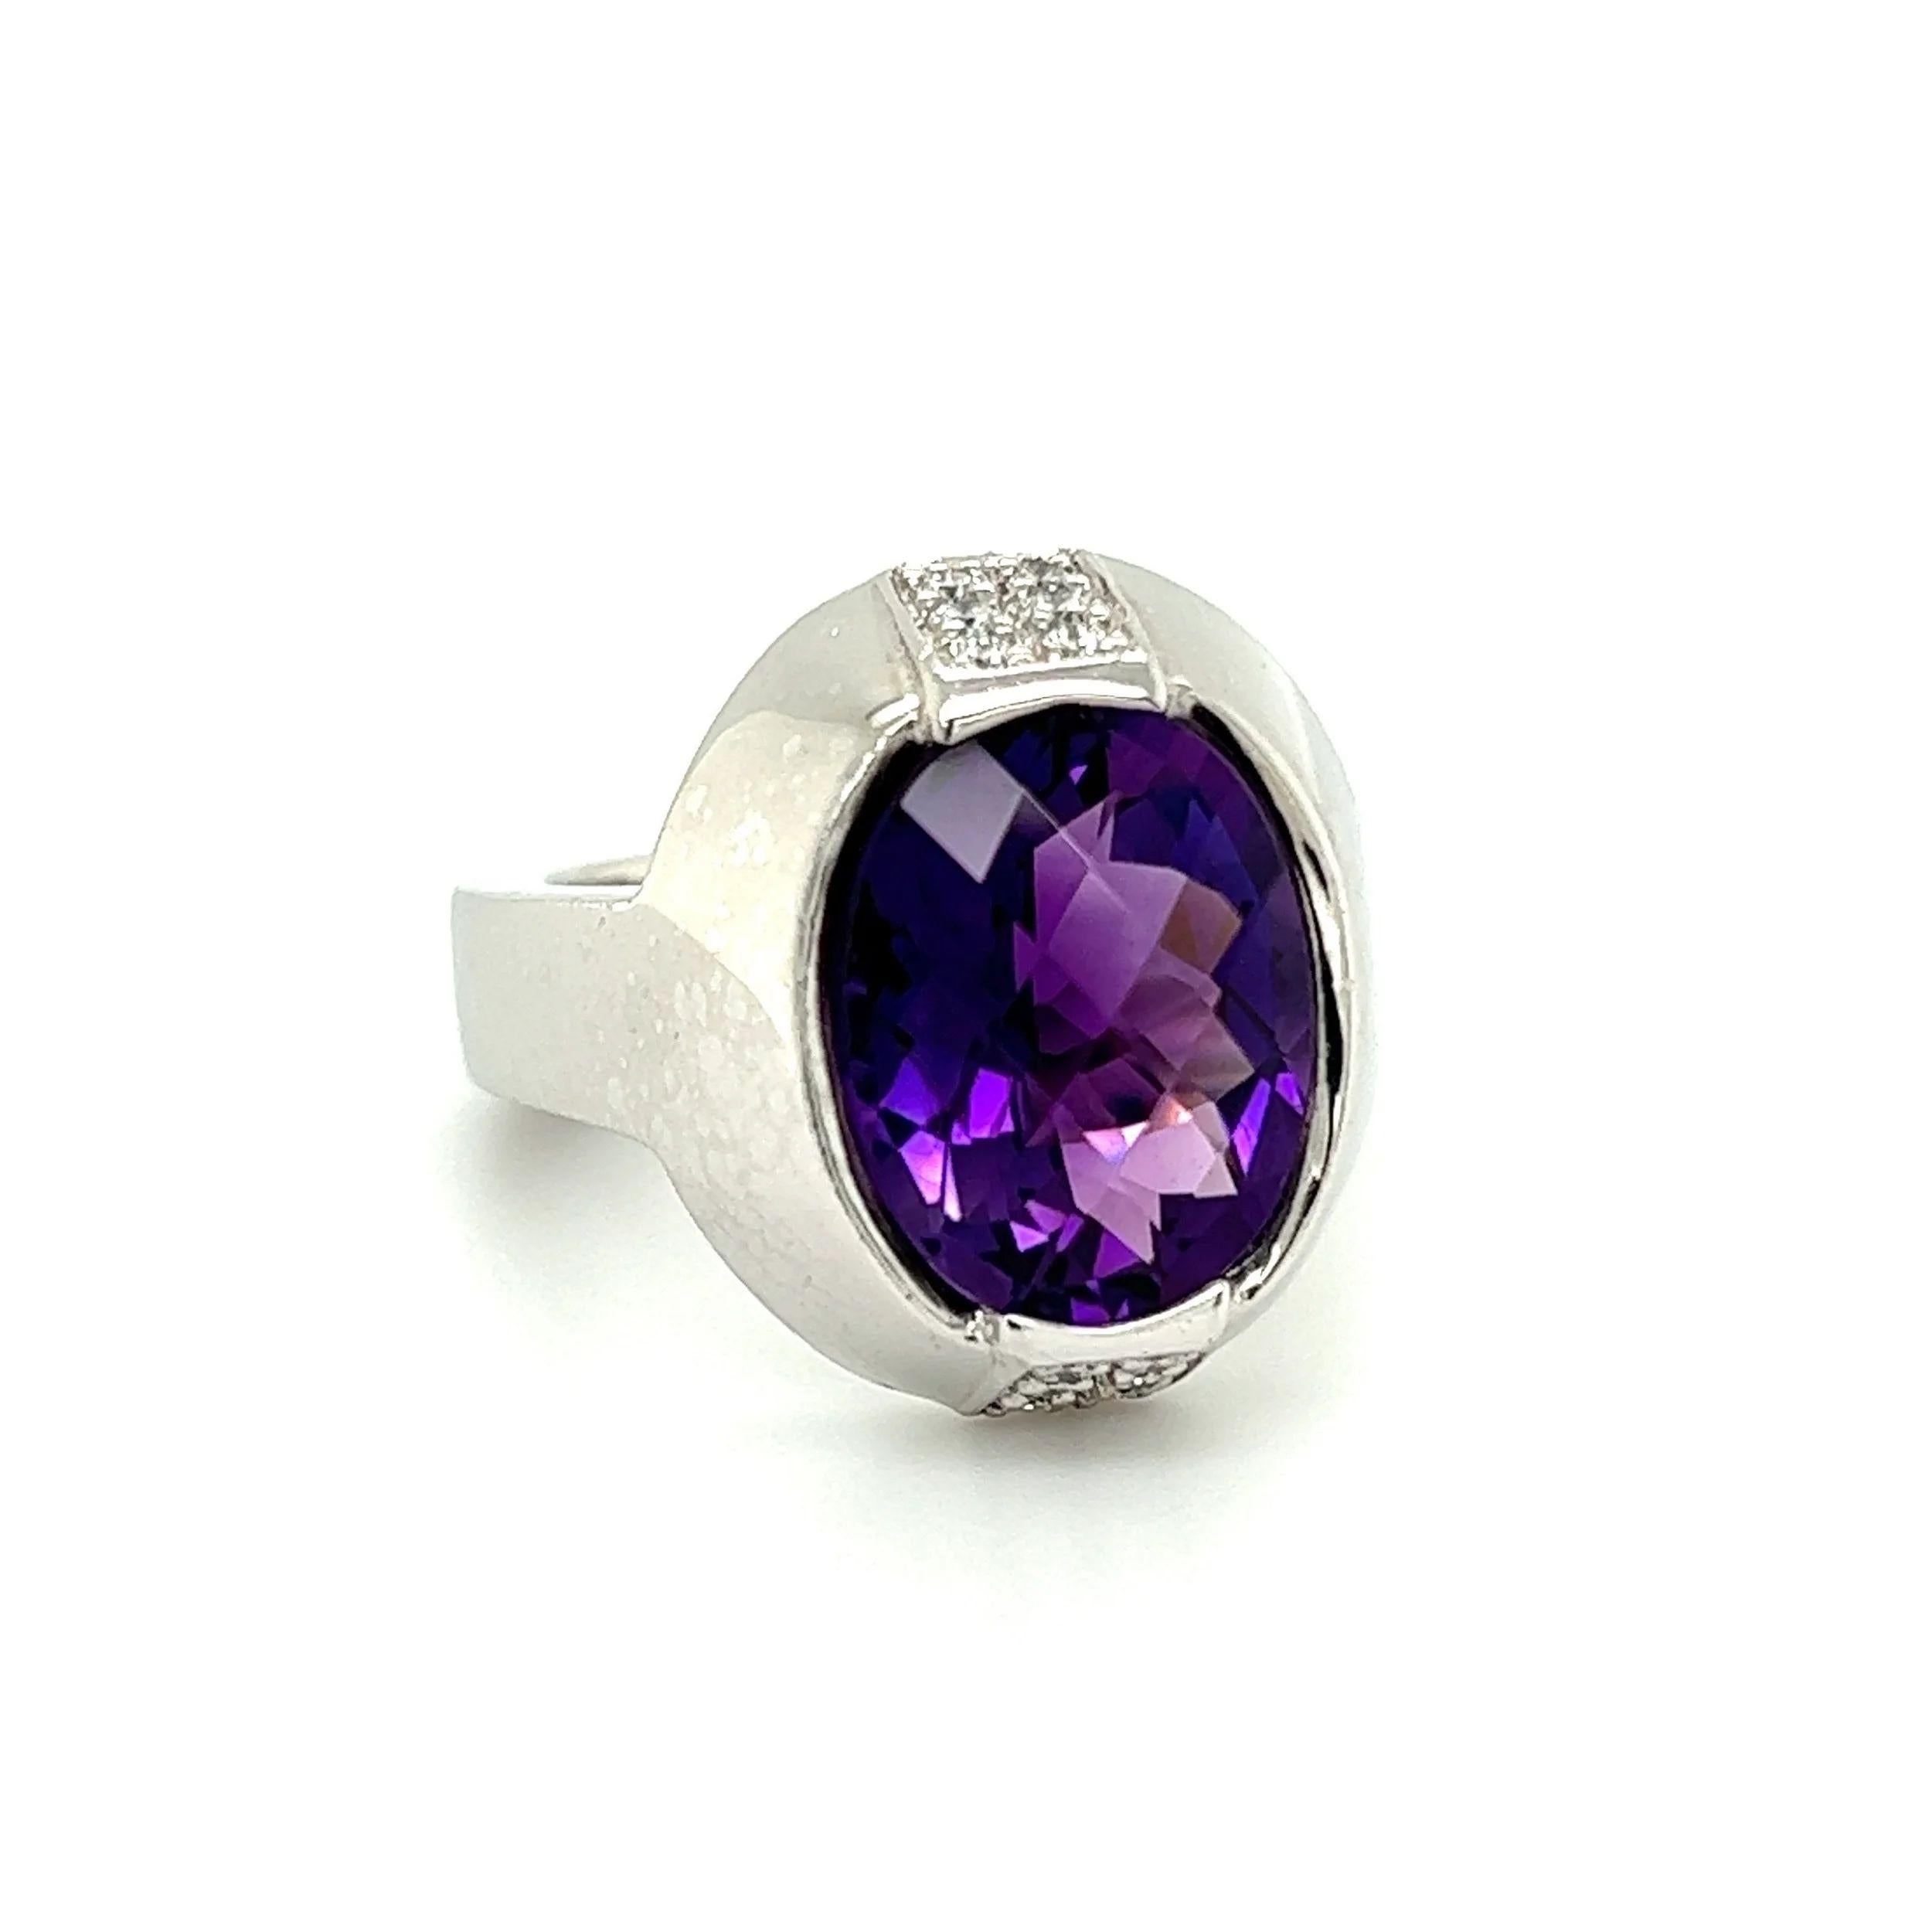 Simply Beautiful! Amethyst and Diamond Vintage Gold Cocktail Ring. Centering a securely nestled 5.38 Carat Checkerboard Amethyst, enhanced with Diamonds, weighing approx. 0.36tcw. Hand crafted 18K White Gold mounting. Approx. Dimensions: 1.09